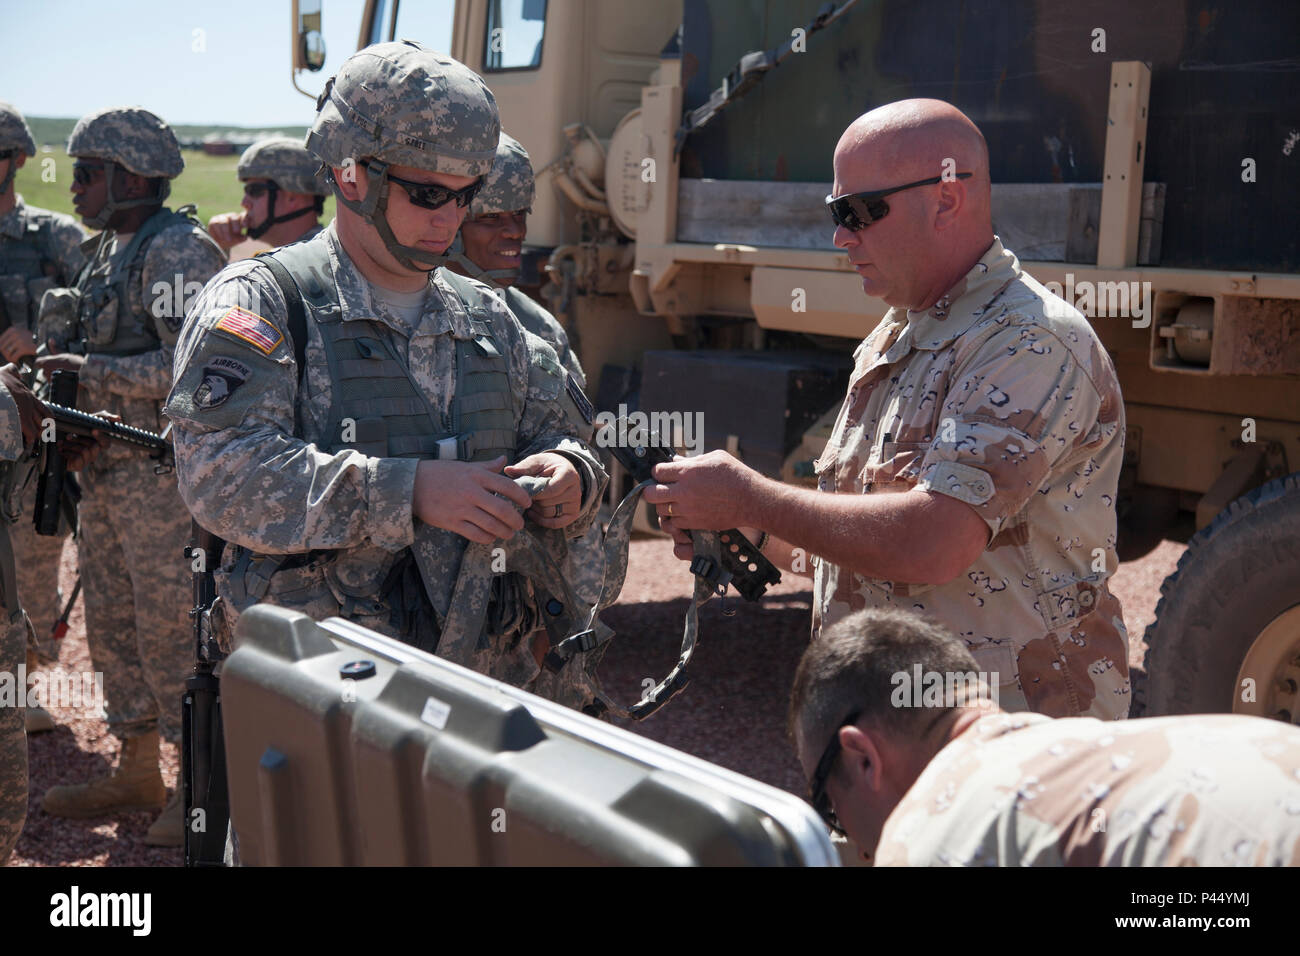 U.S. Army Staff Sgt. Michael Schwans of the 1st Battalion, 147th Field Artillery, South Dakota Army National Guard, hands a set of Multiple Integrated Laser Engagement System (MILES) Gear to Spc. Barry Gould of the 396th Medical Company (Ground Ambulance), Army Reserve, prior to a convoy operations exercise during the Golden Coyote exercise in Camo Guernsey, Wyo., June 15, 2016.  The Golden Coyote exercise is a three-phase, scenario-driven exercise conducted in the Black Hills of South Dakota and Wyoming, which enables commanders to focus on mission essential task requirements, warrior tasks a Stock Photo